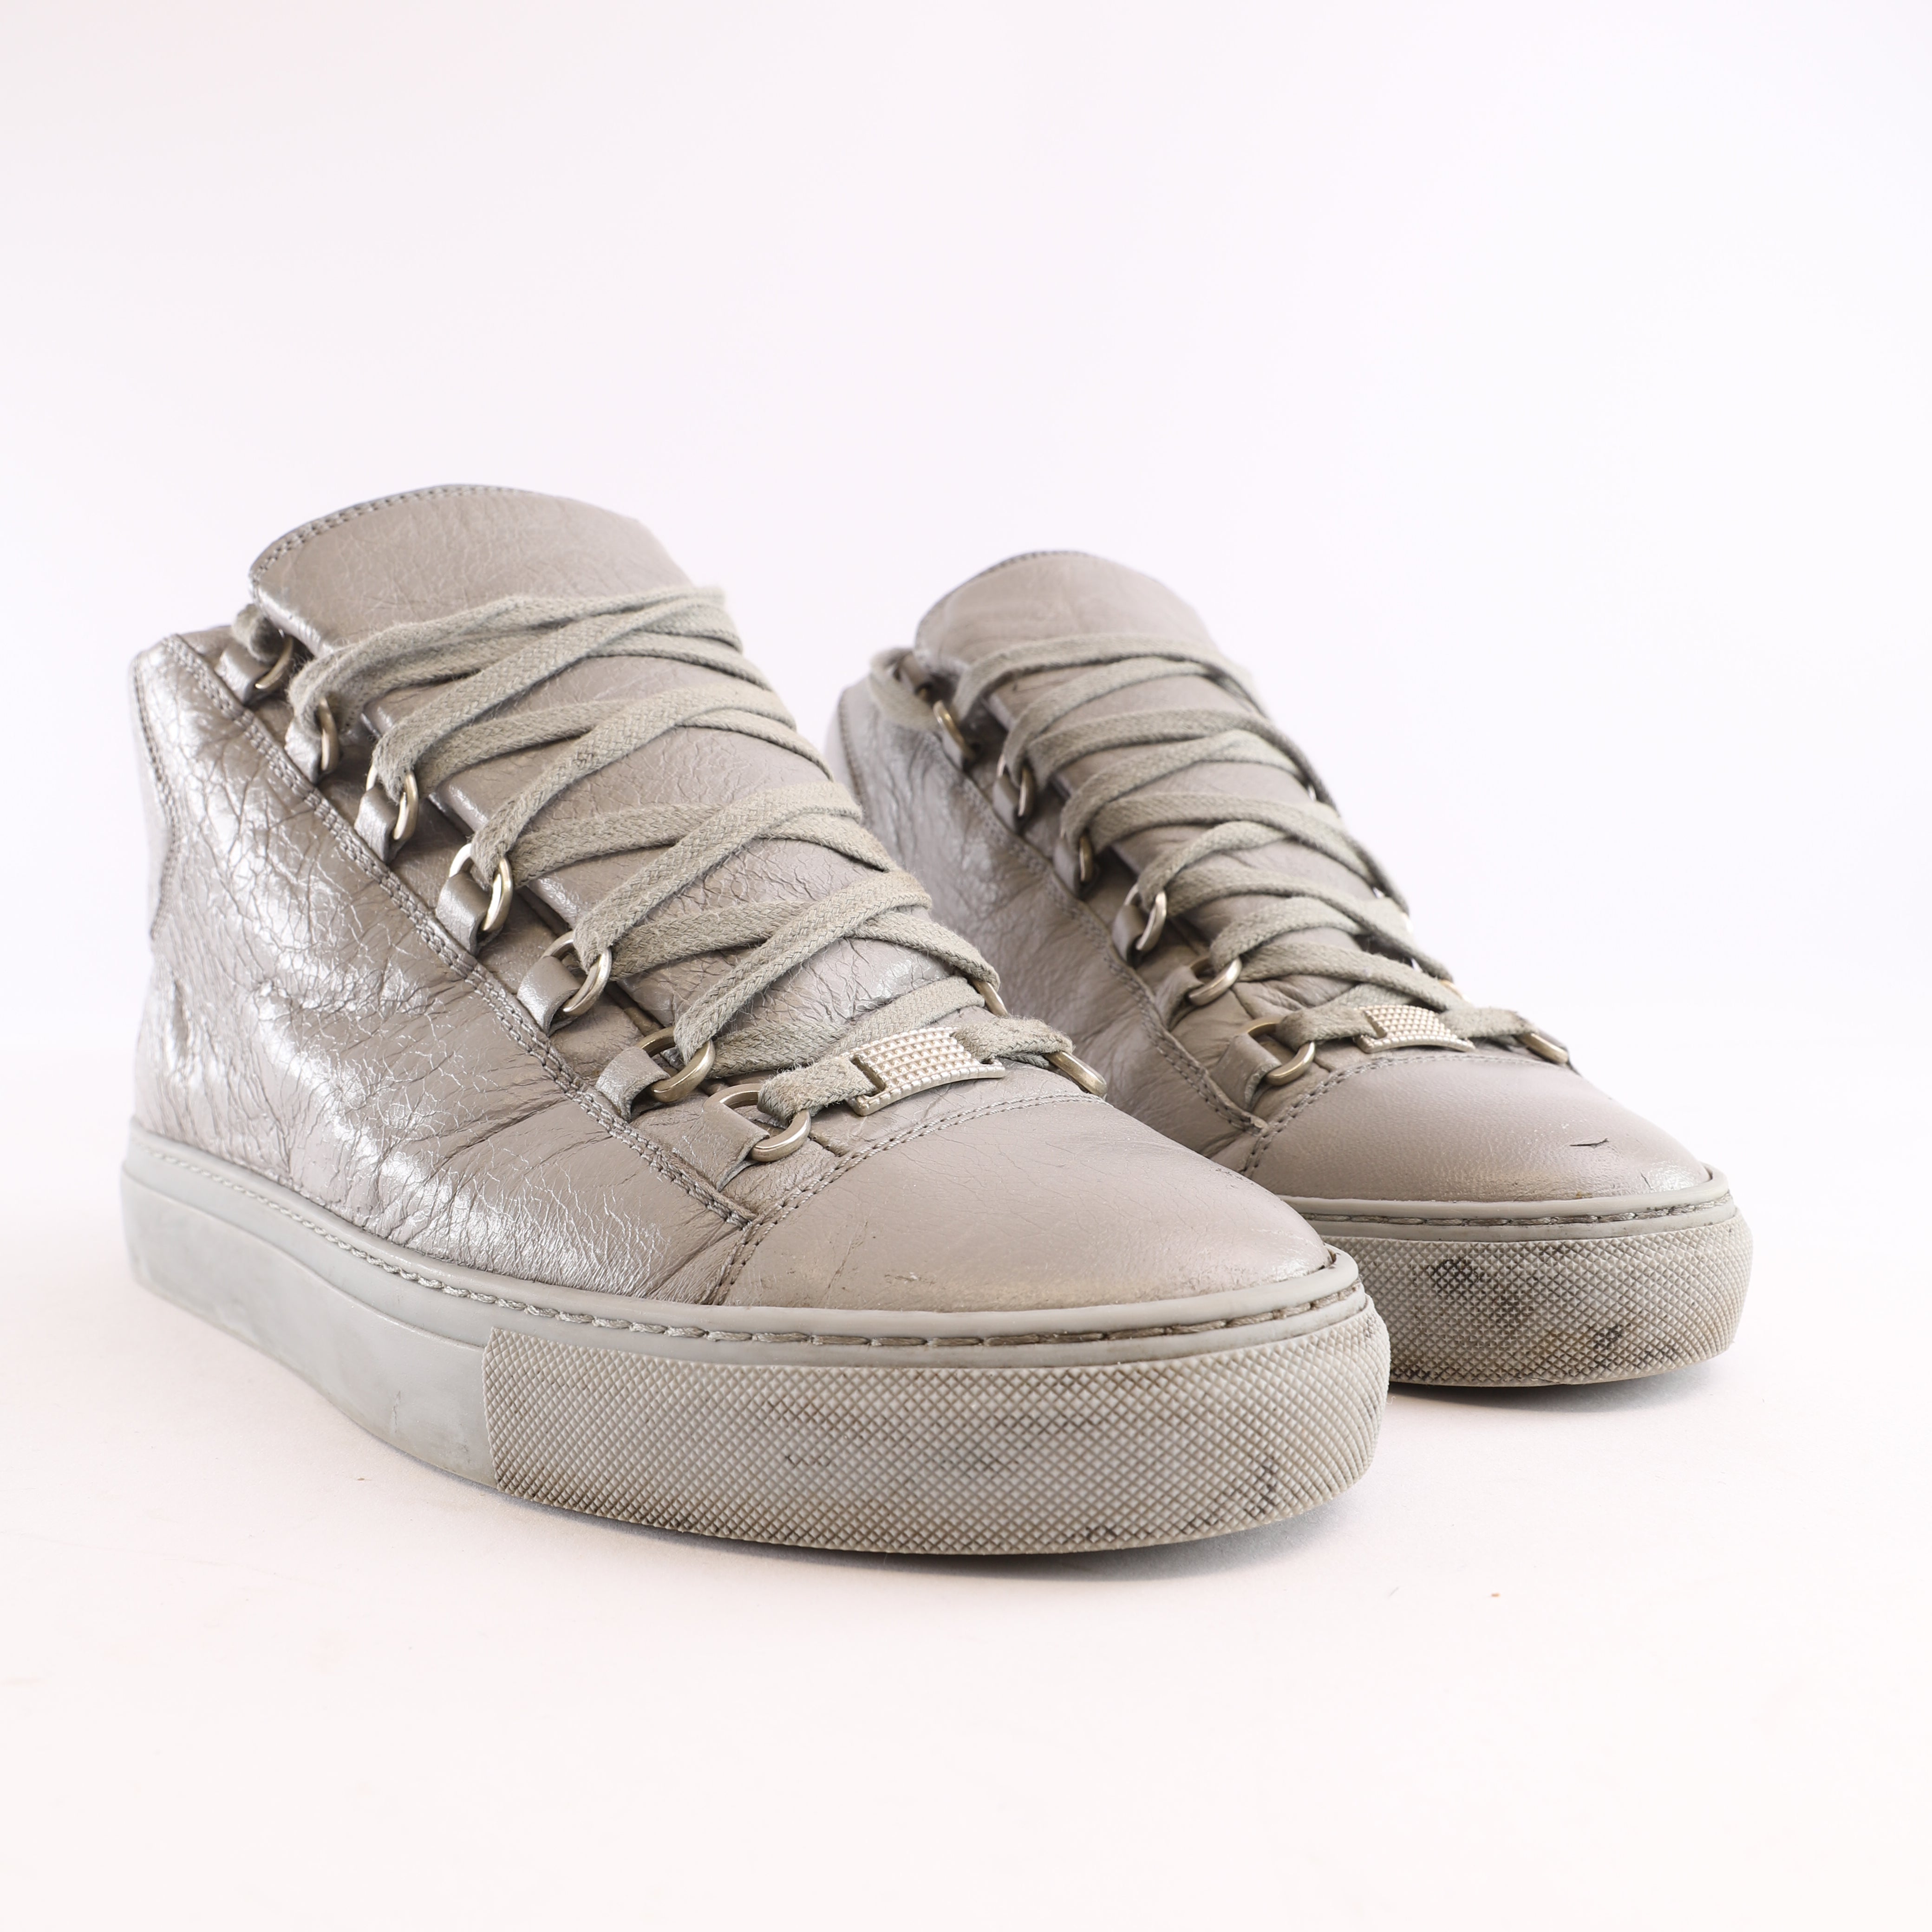 Arena leather high trainers Balenciaga Grey size 40 EU in Leather  13468225